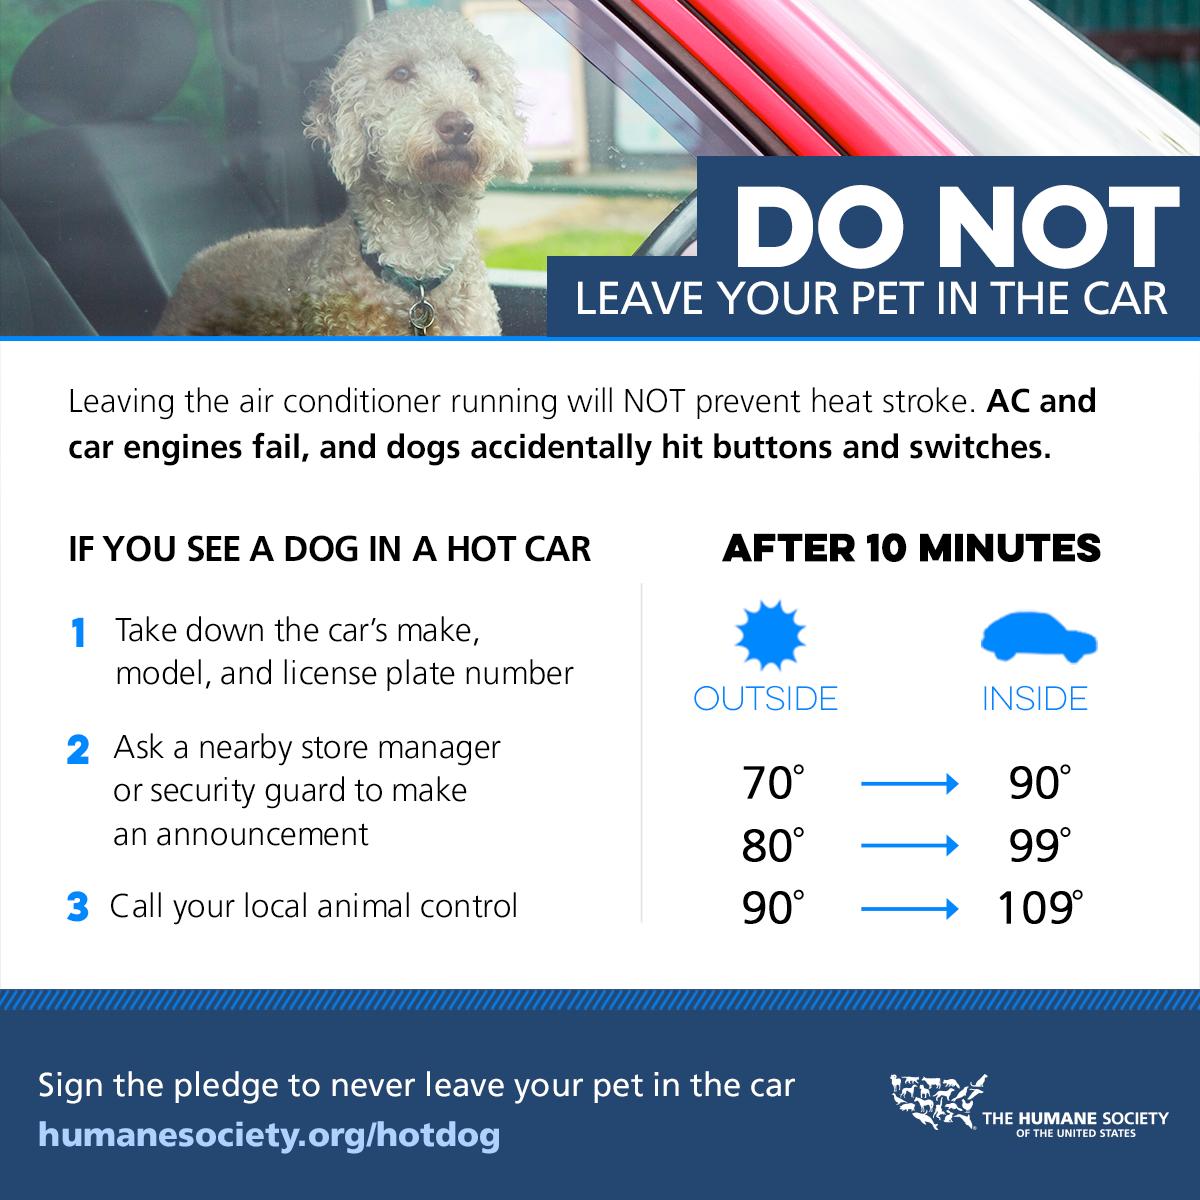 #OTLFP Caution! It's summertime and that means HOT cars! Please don't leave your pets in the car for even a few minutes. Don't make this terrible mistake! It's far too dangerous and even deadly! 😱☀️🌡